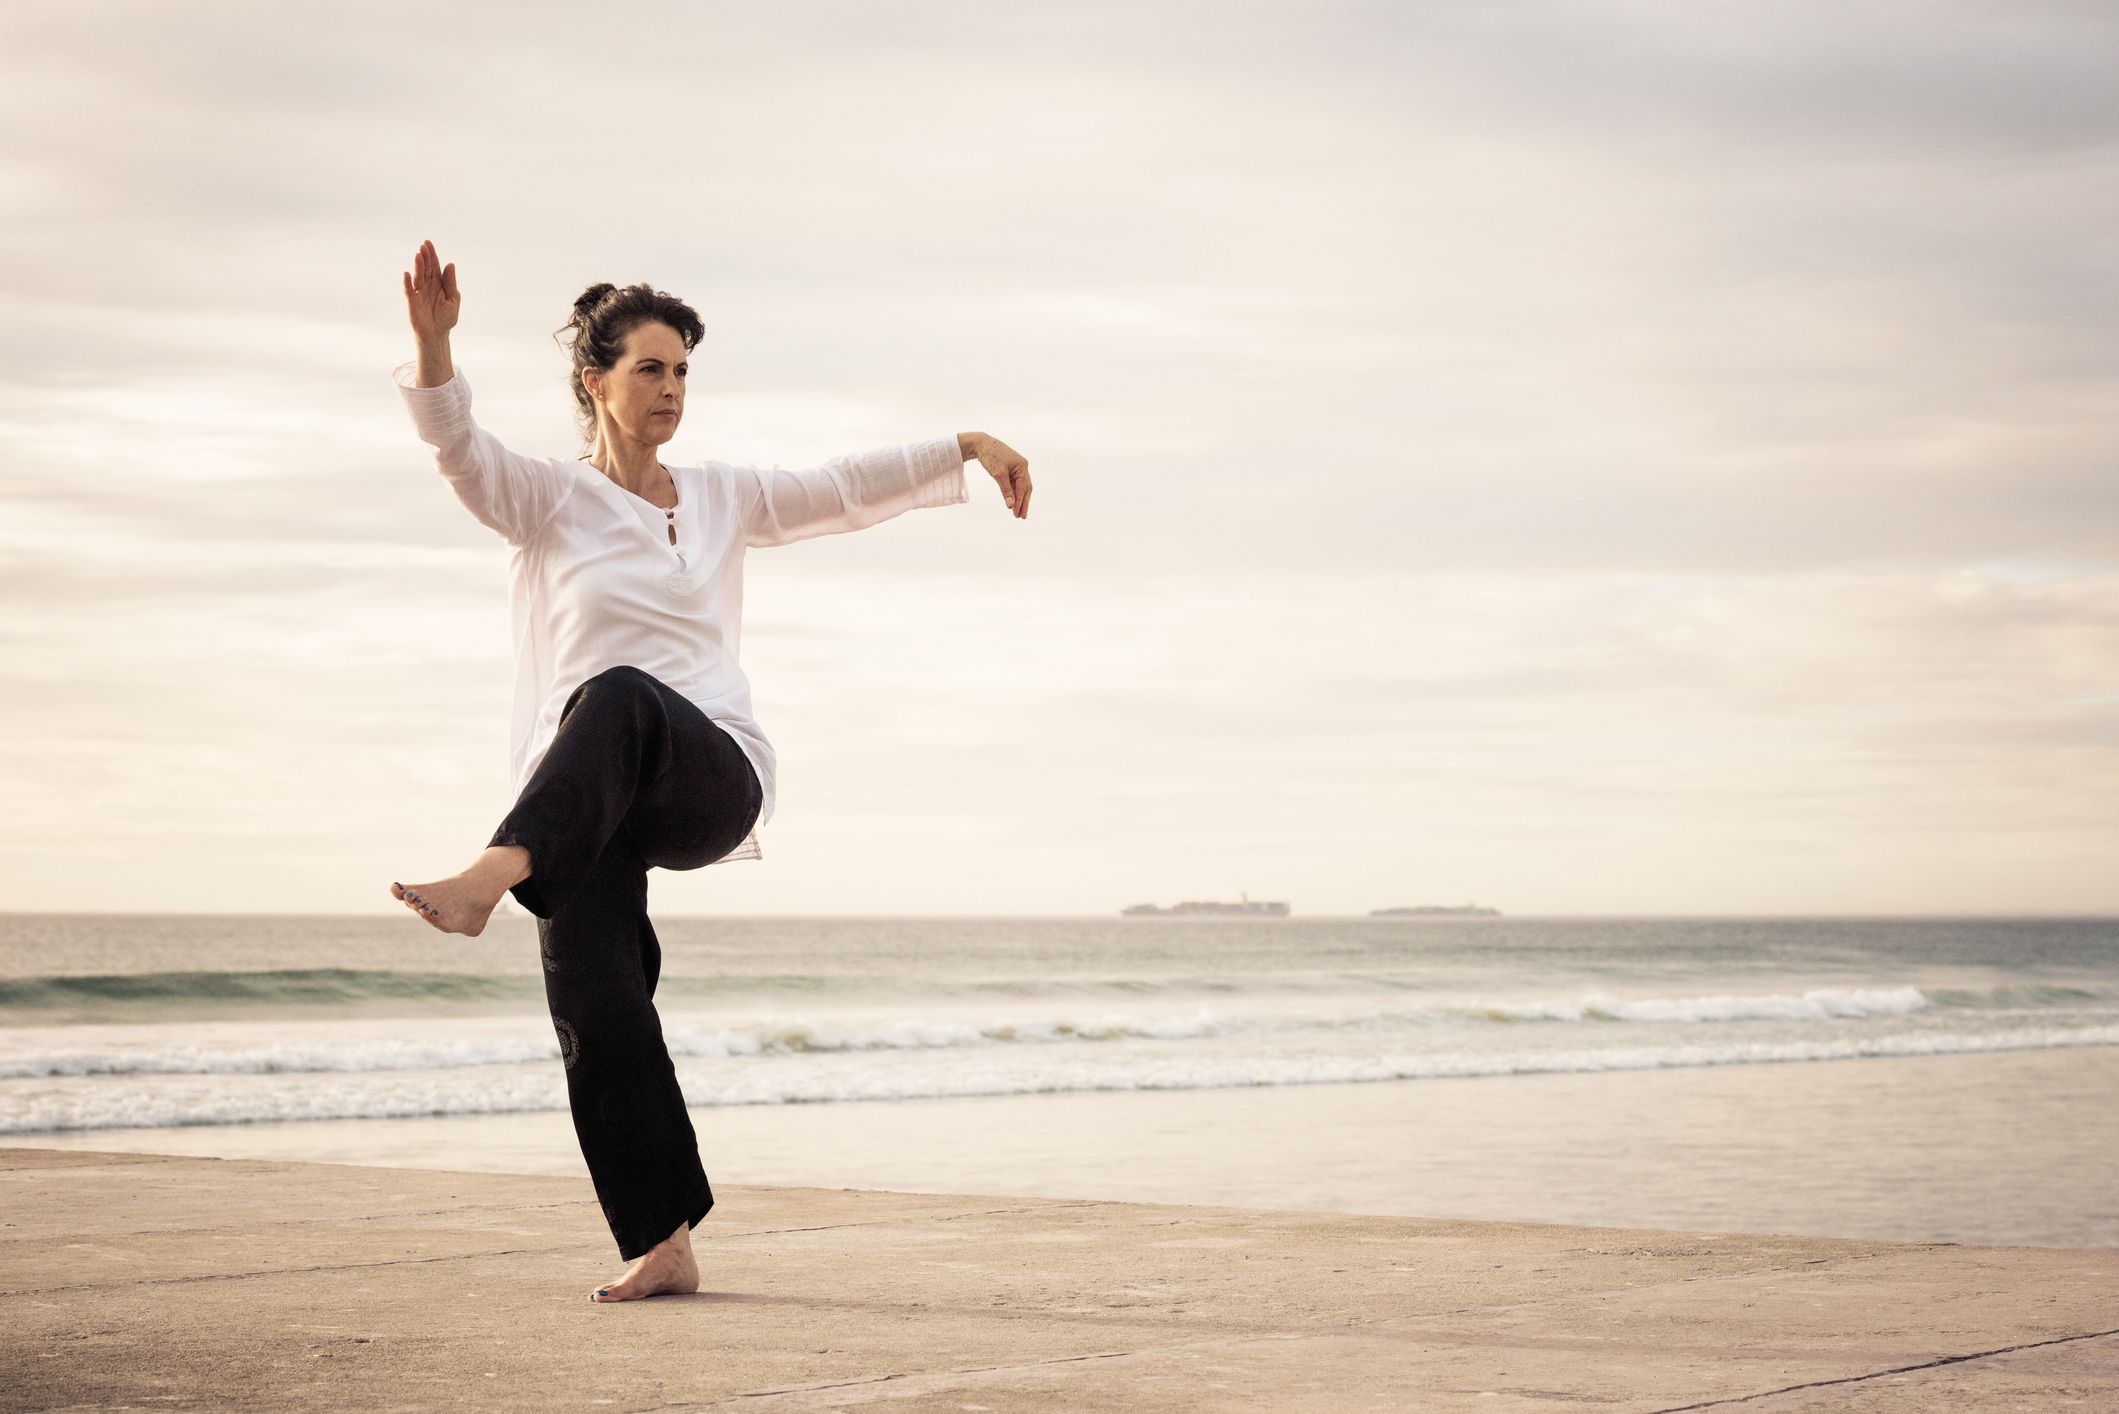 Yoga, Tai Chi, and Pilates: Will These Practices Benefit My Health?